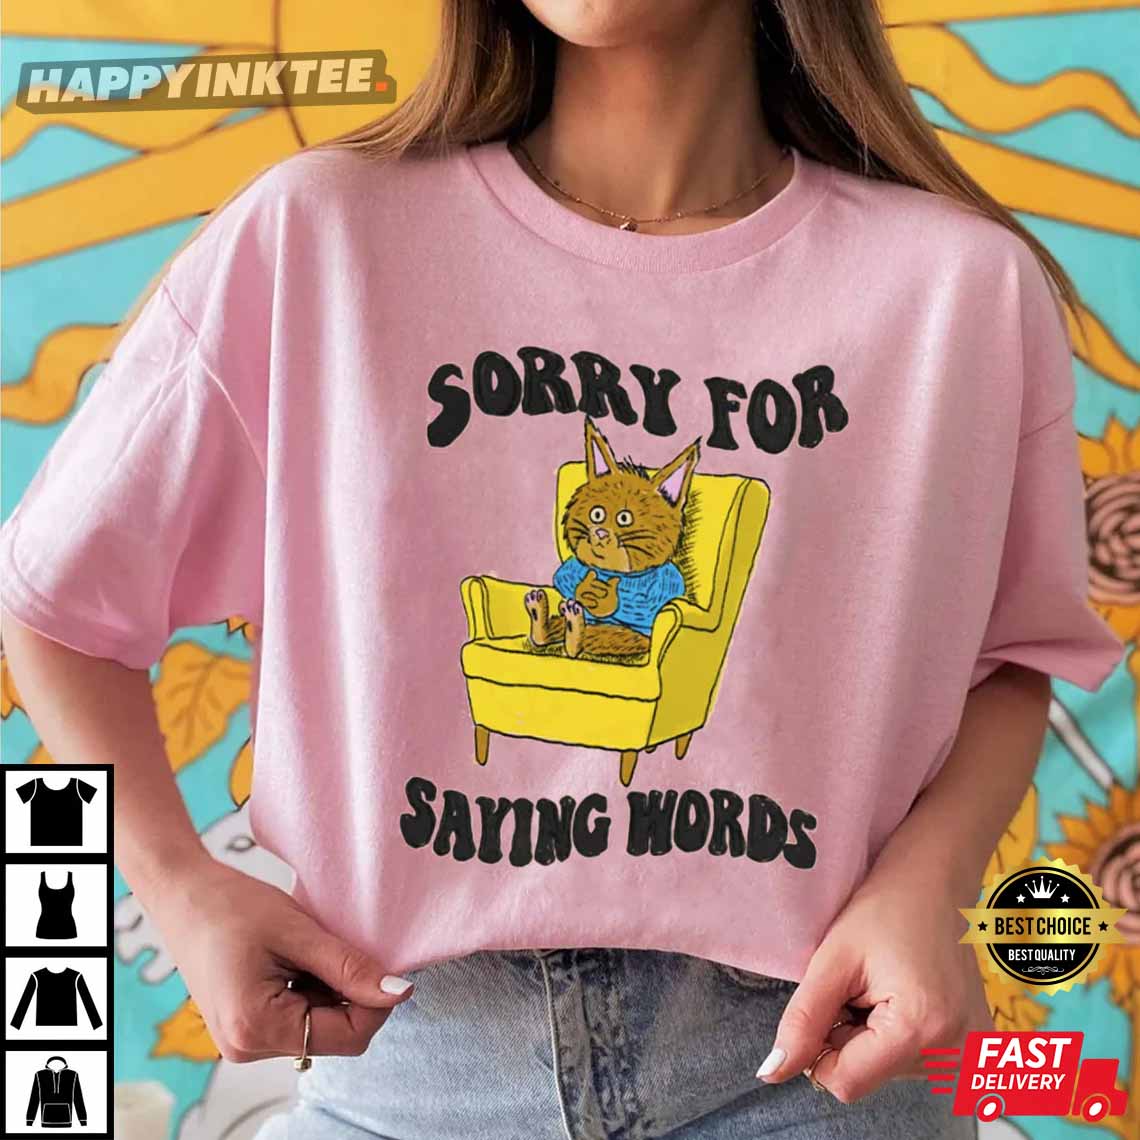 Sorry For Words Funny T-Shirt